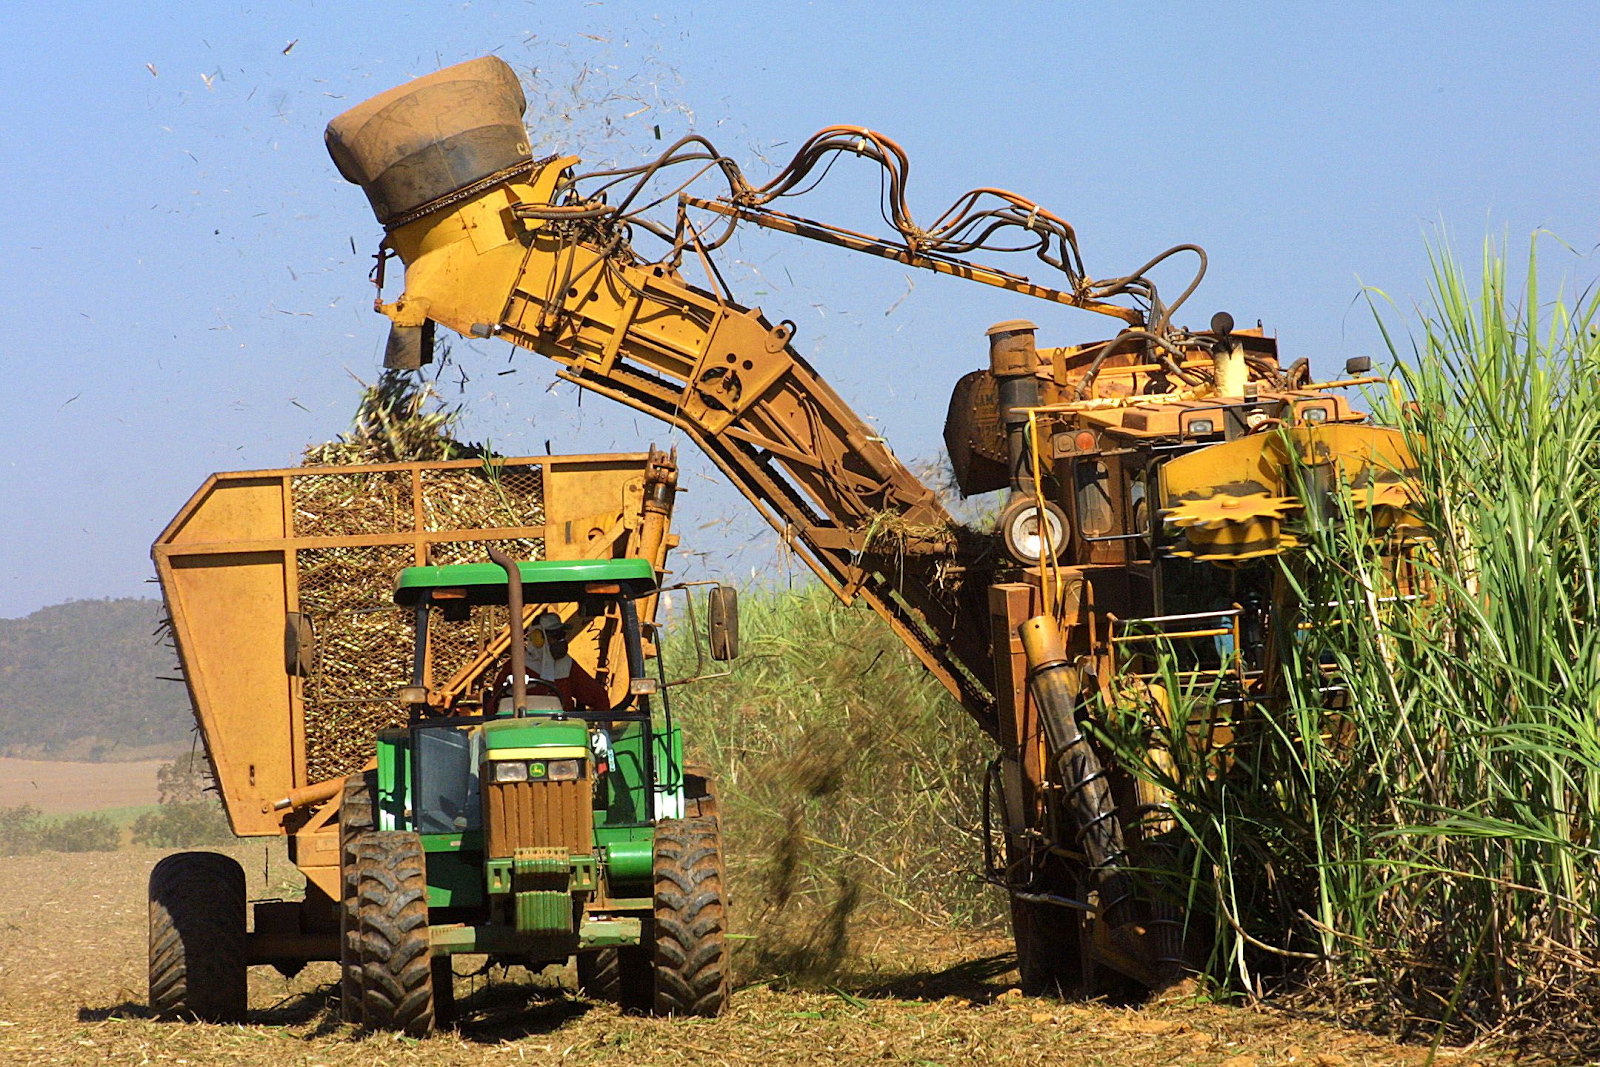 sugarcane crop is projected to improve in mills and may improve ethanol price